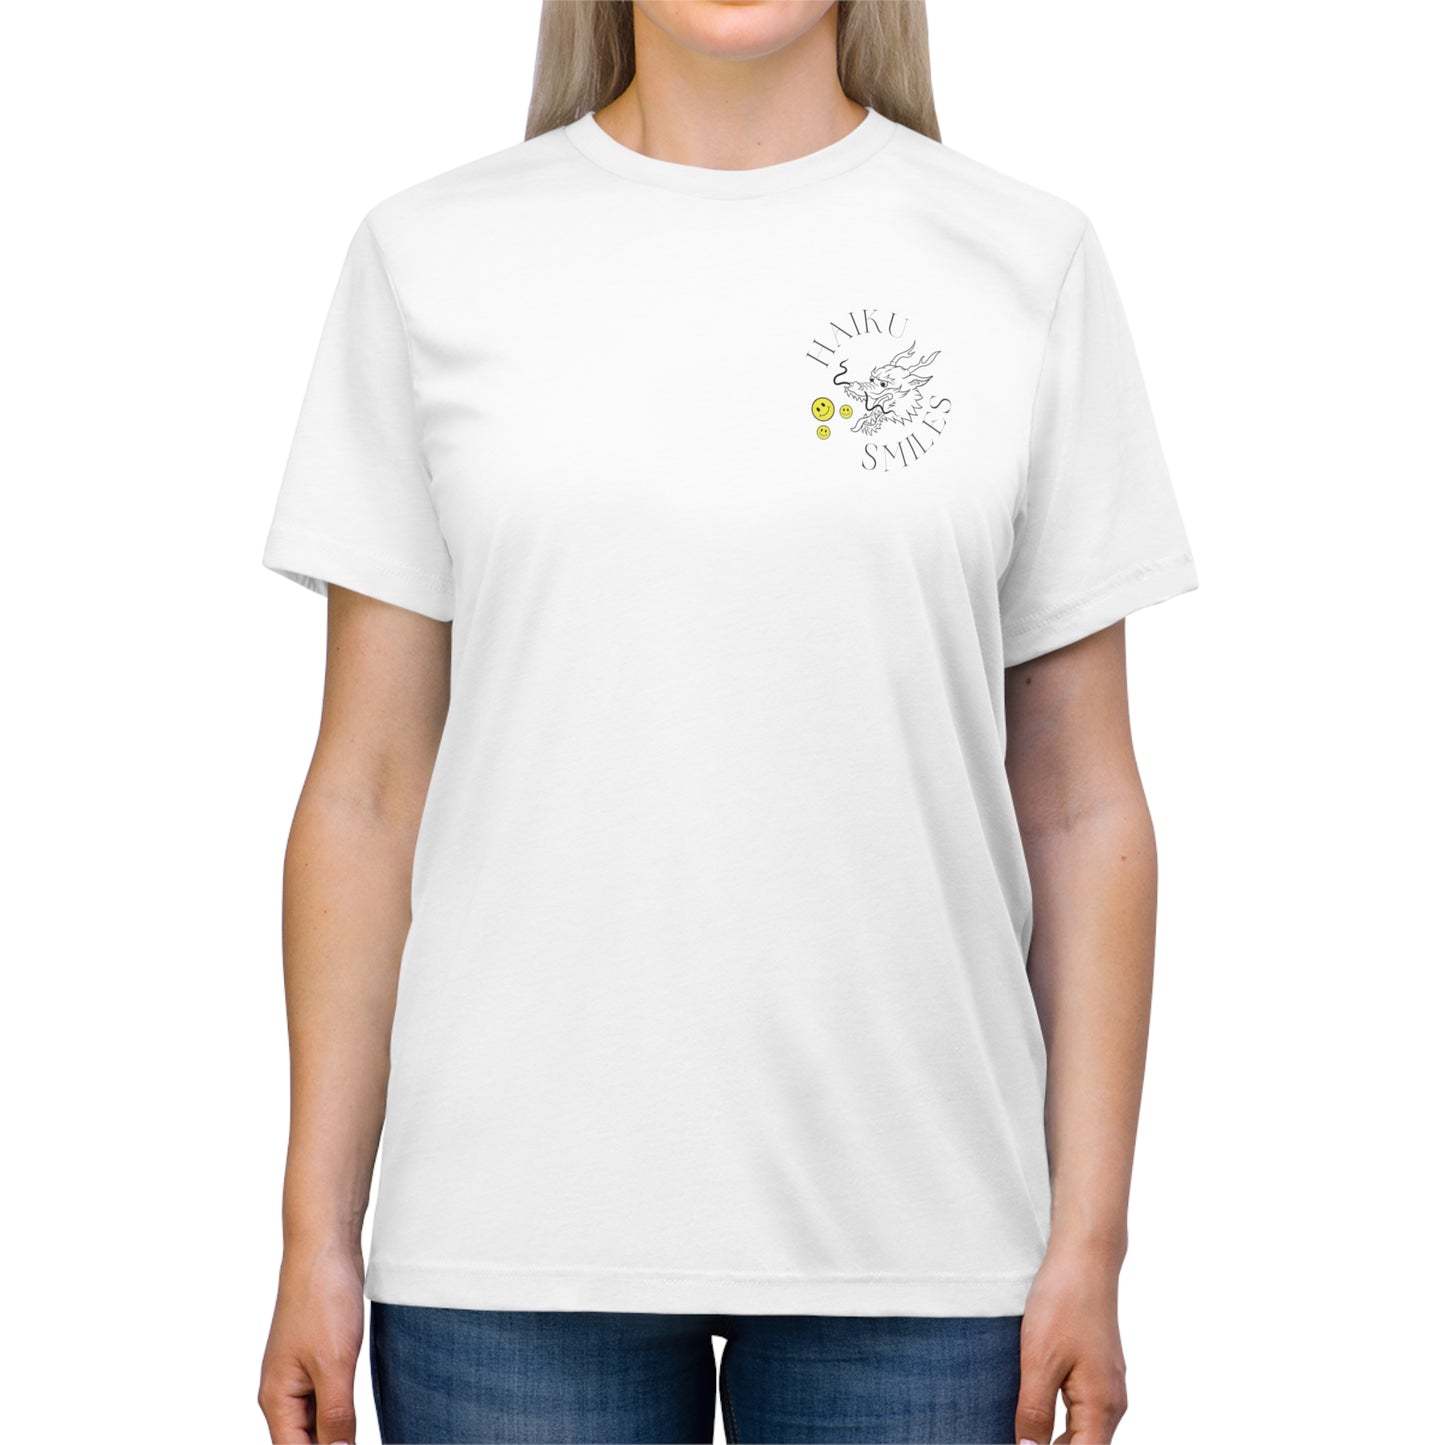 The Strong Breathe Smiles! - Triblend Tee